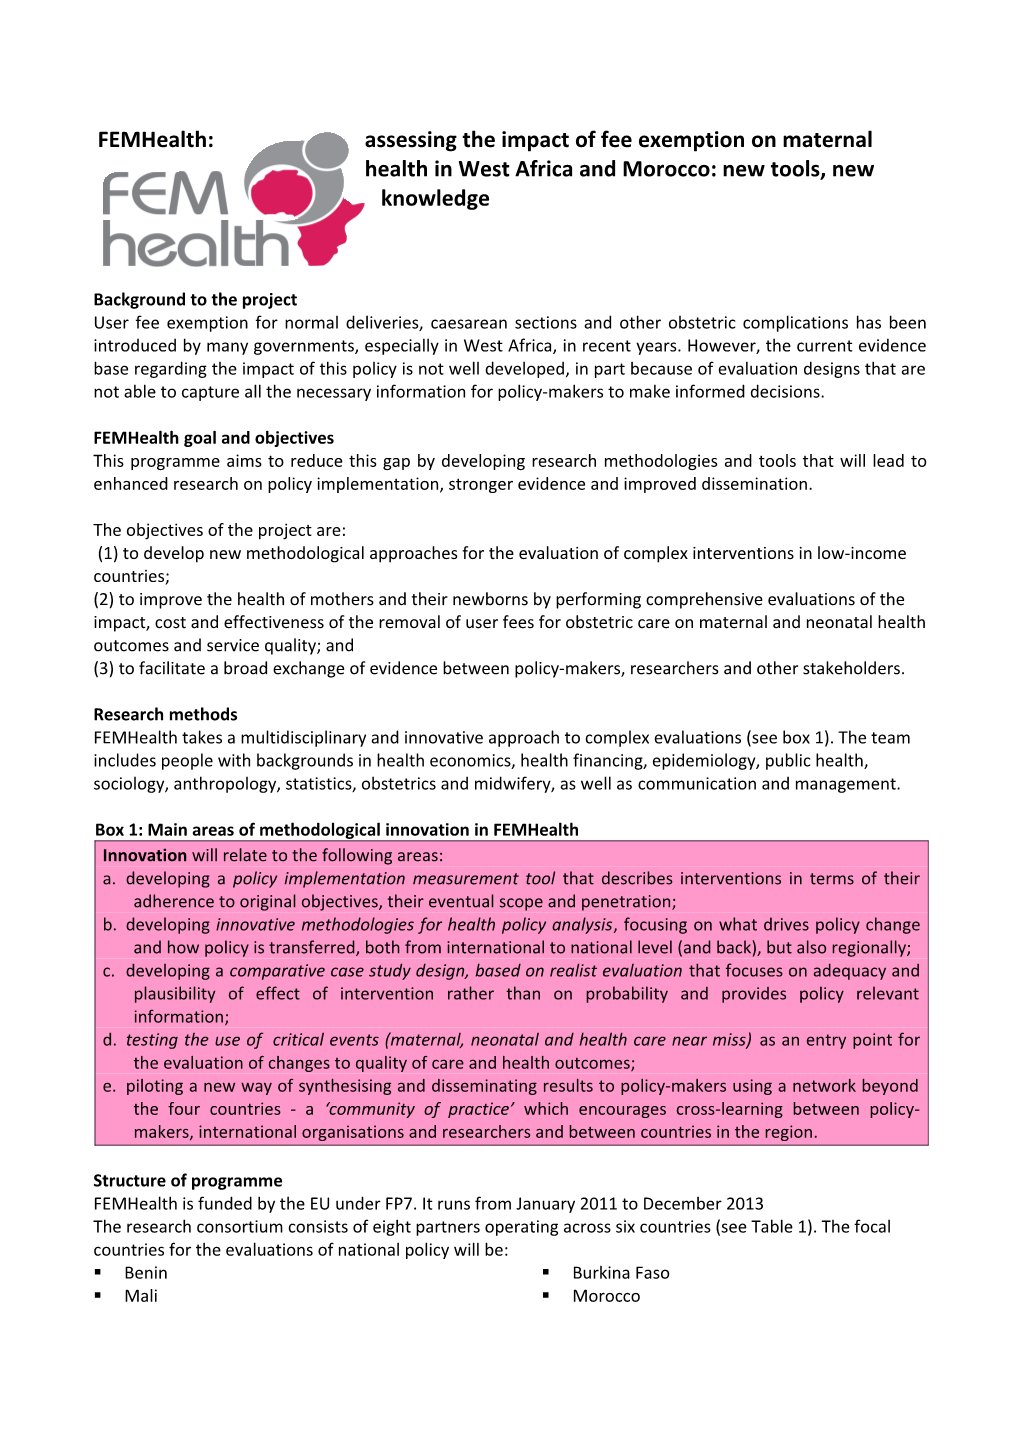 Femhealth: Assessing the Impact of Fee Exemption on Maternal Health in West Africa And